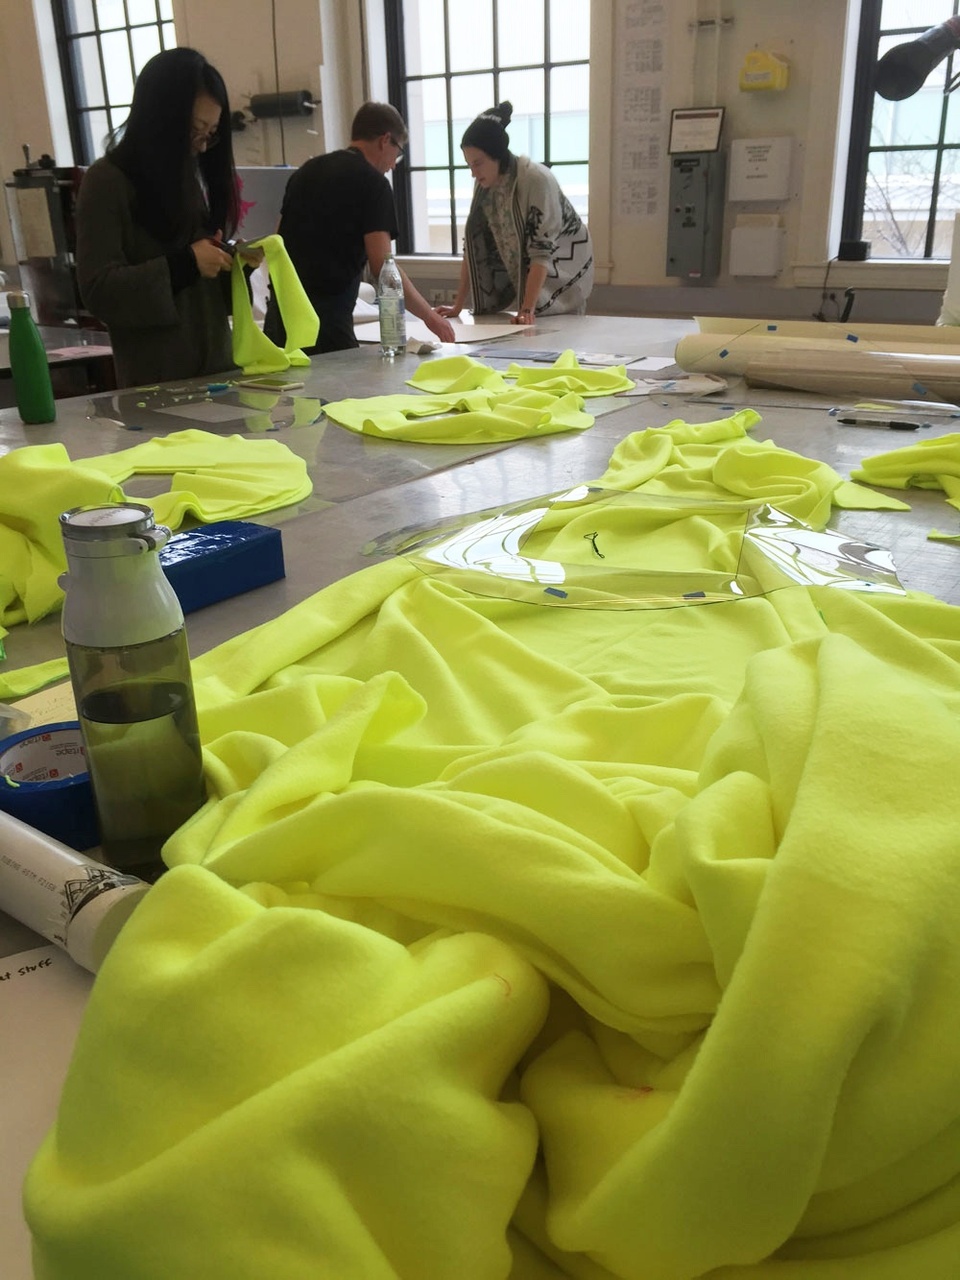 bright yellow fabric in foreground with people working in the background